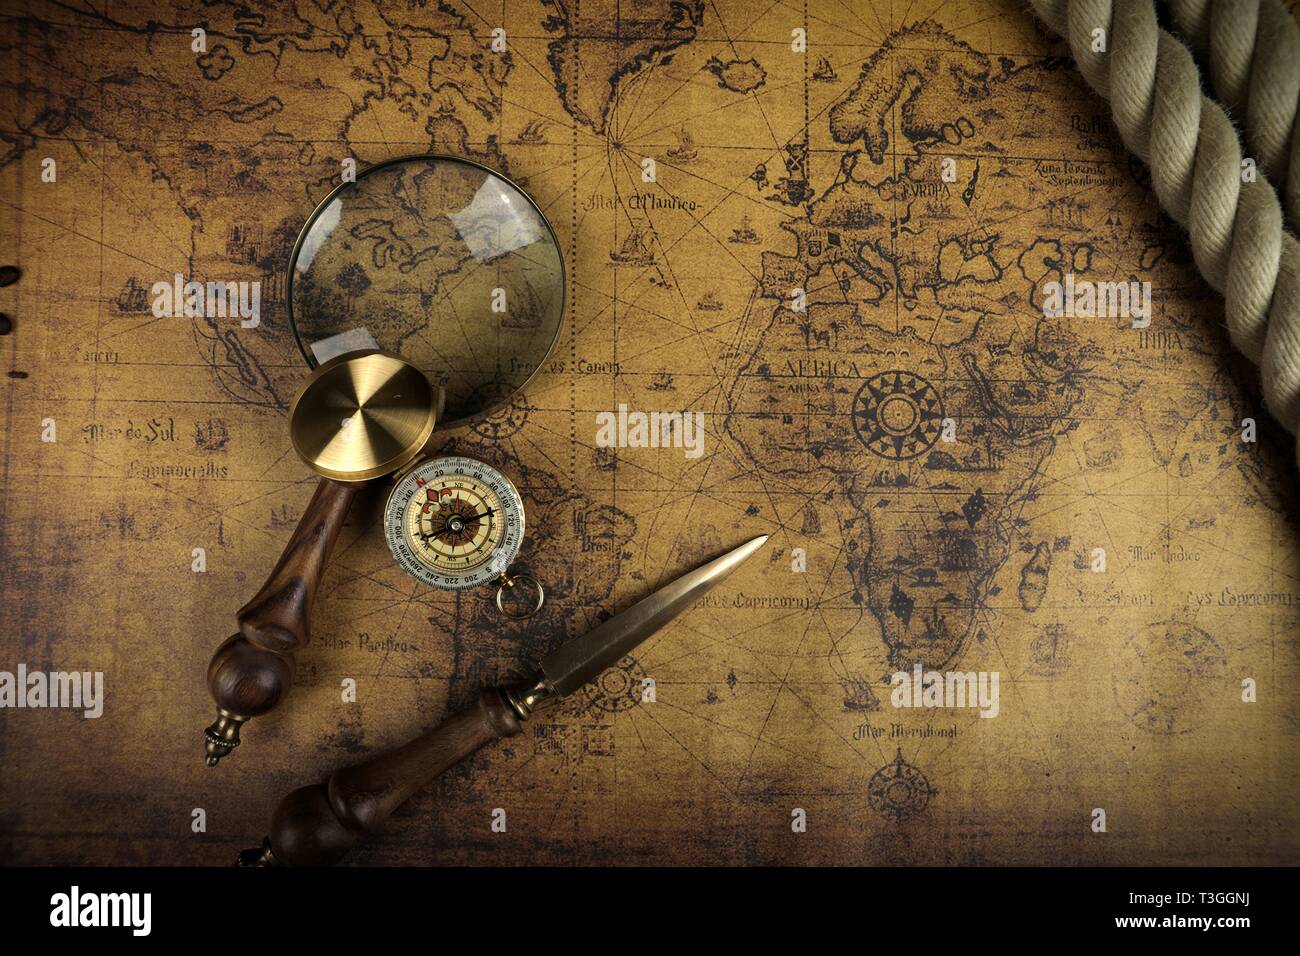 Vintage Compass and magnifying glass lies on an ancient world map - adventure stories background Stock Photo